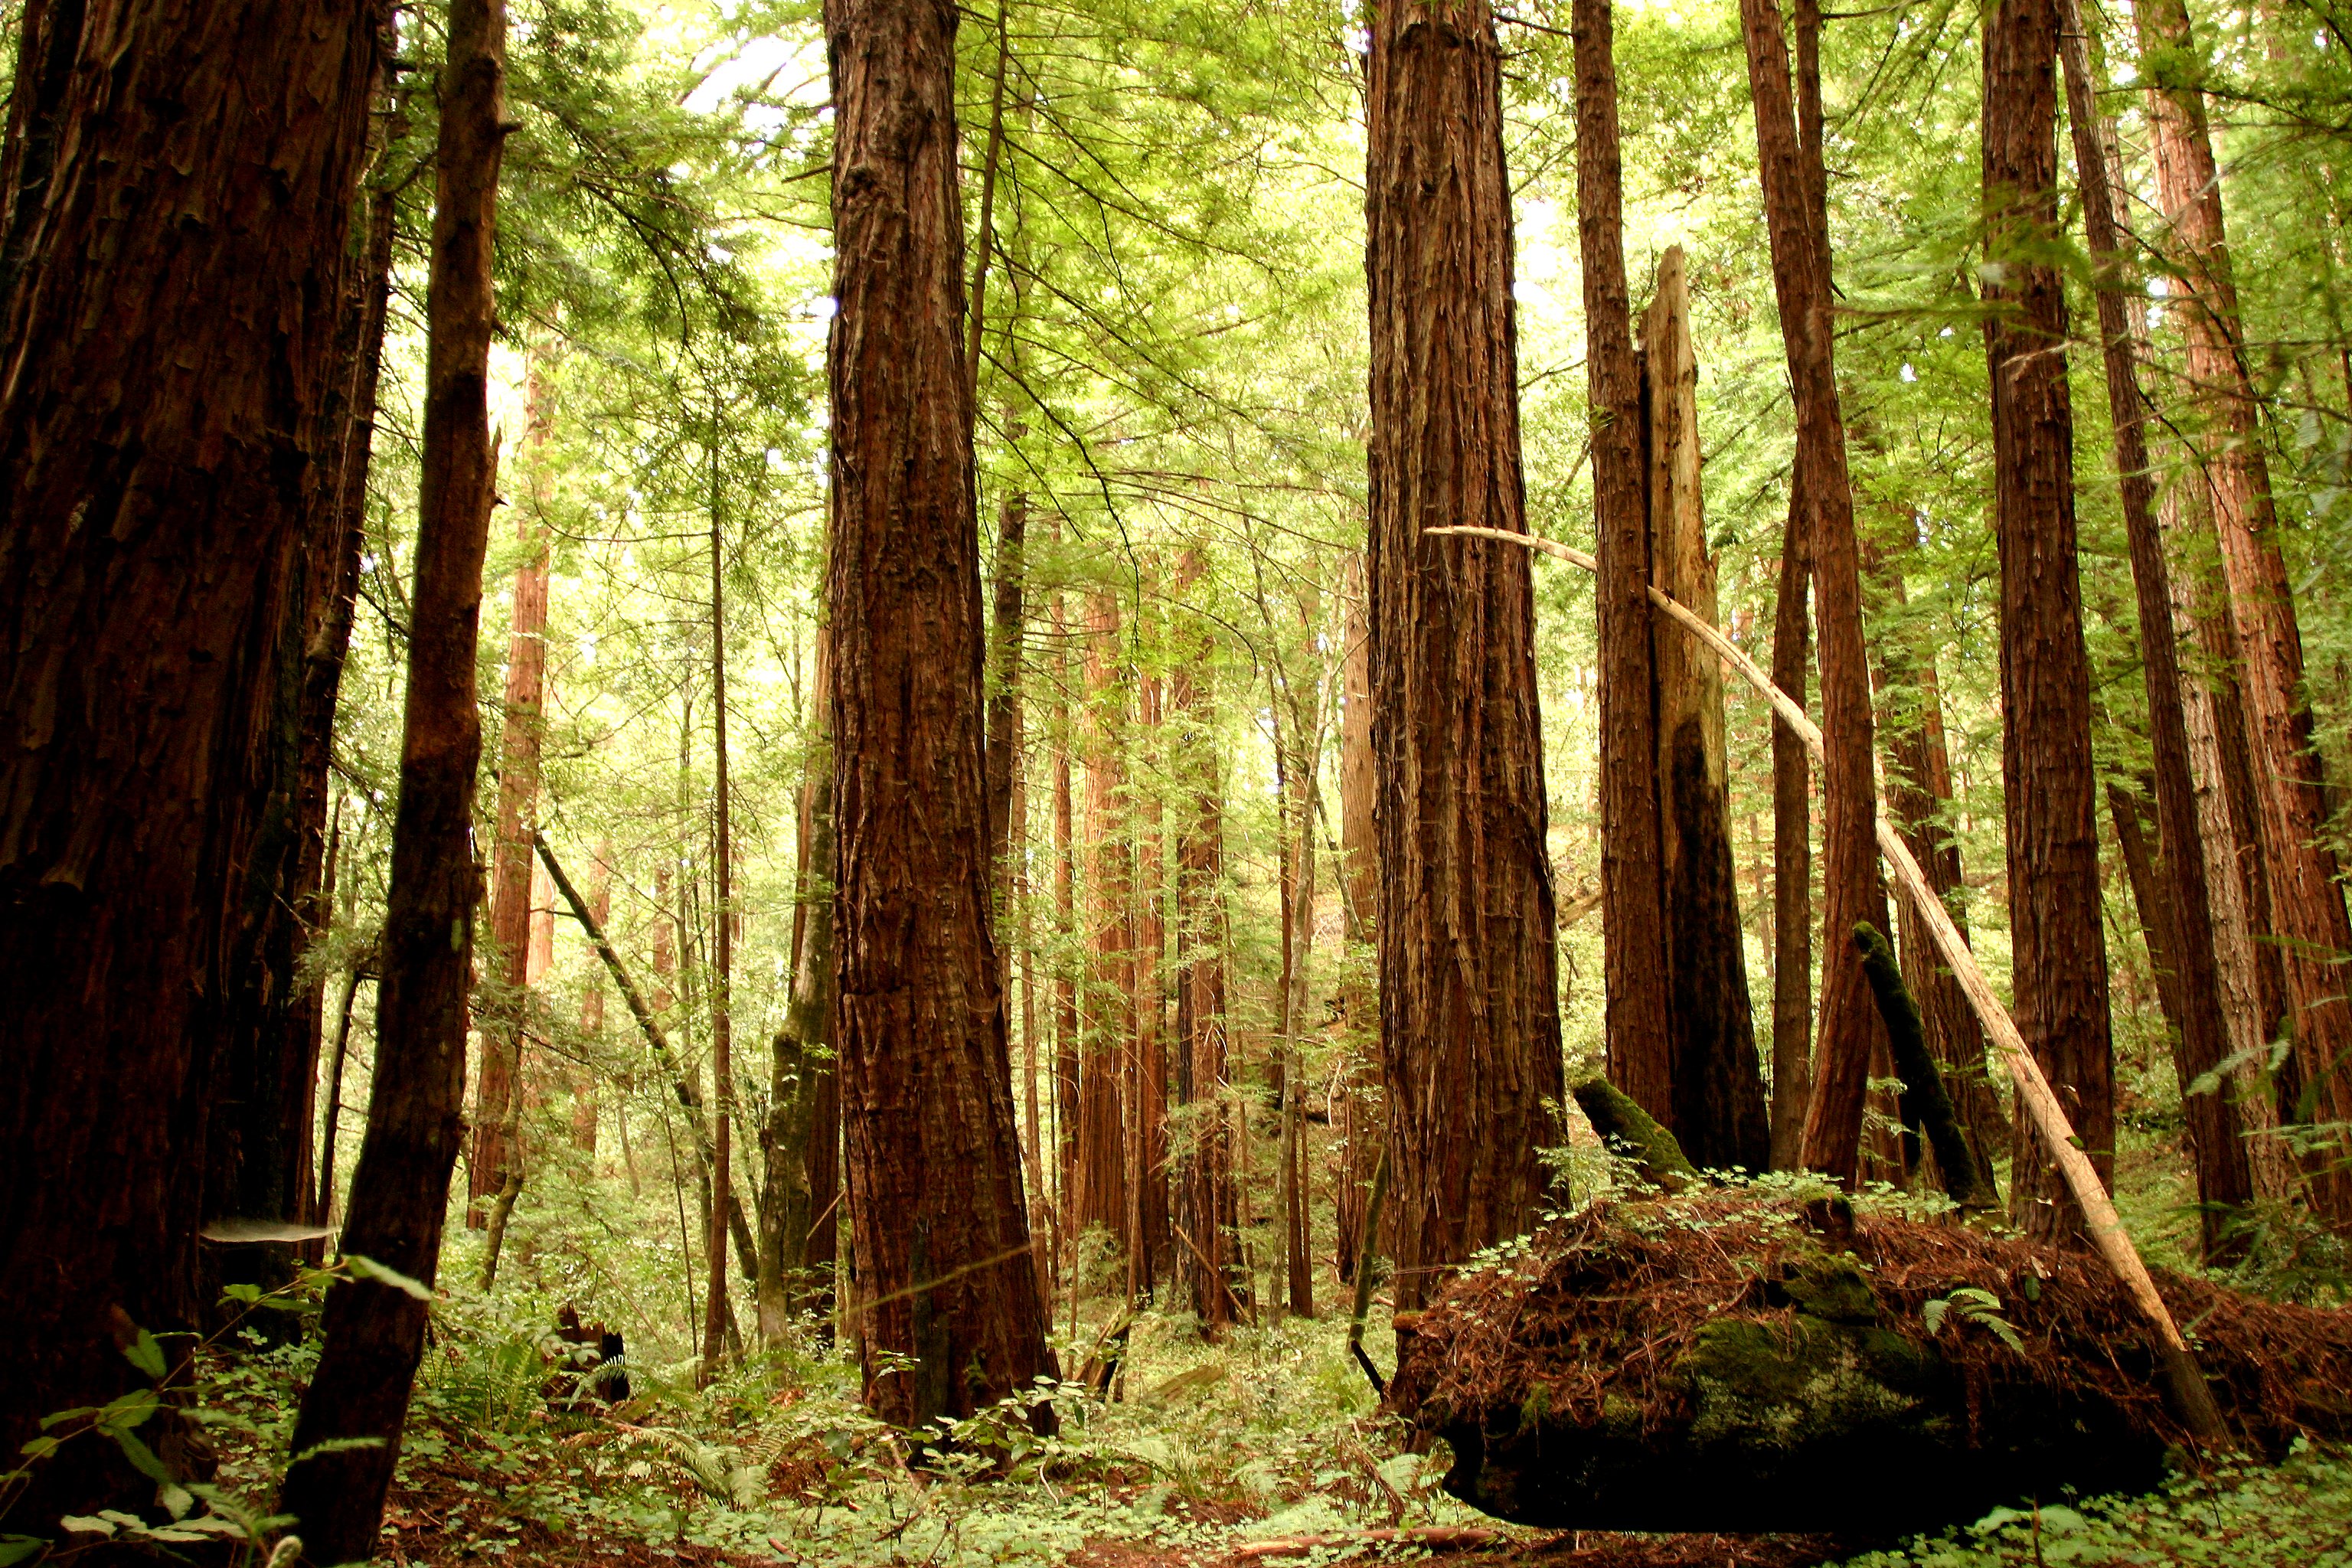 Environmentalists plan logging to restore redwood forests